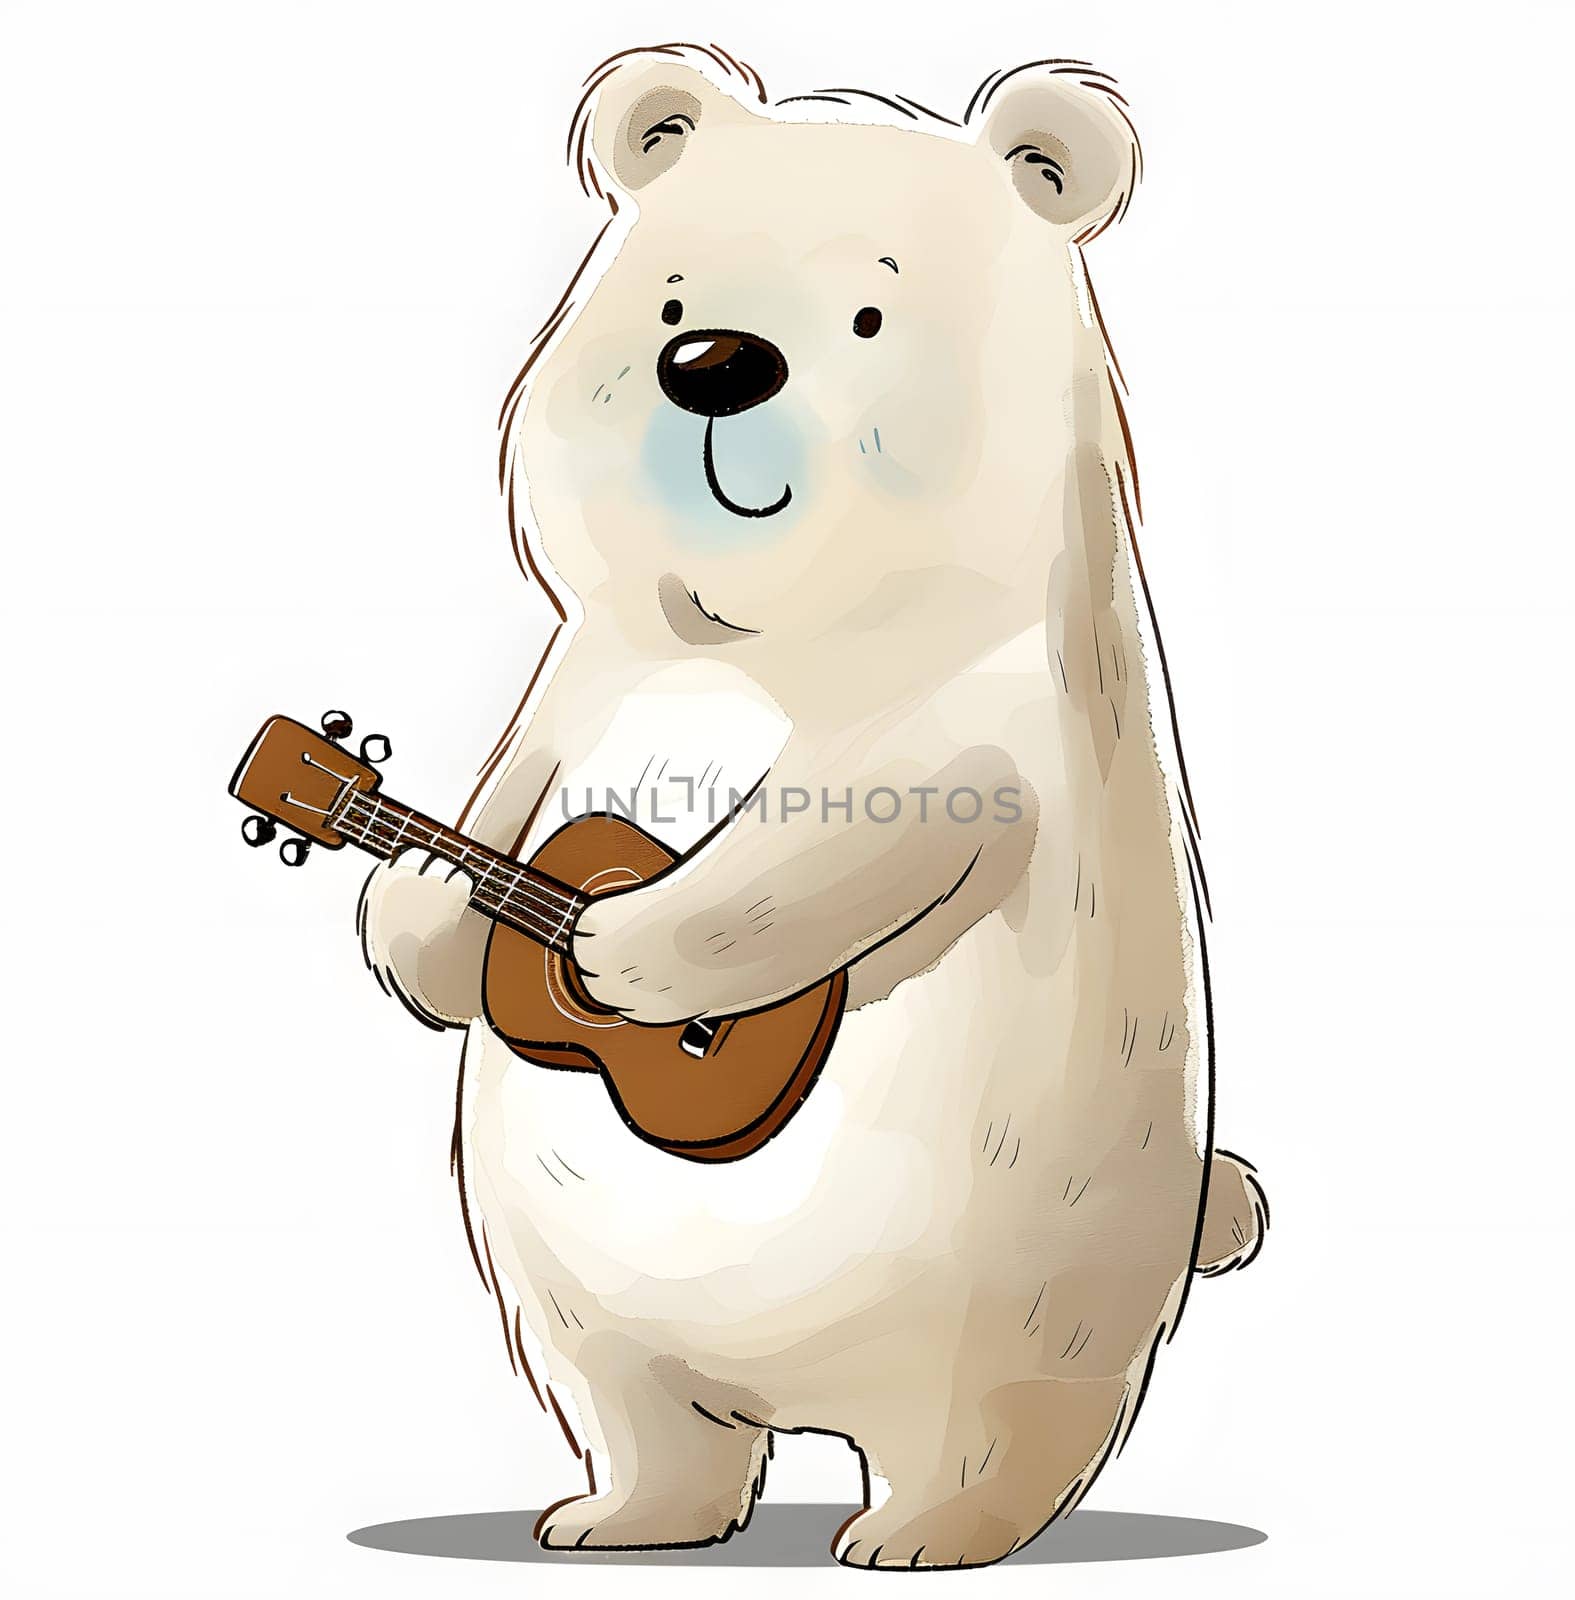 An animal figure of a polar bear, a carnivorous terrestrial animal, is playing a toy guitar in an illustration on a white background, showcasing its furry coat and tail